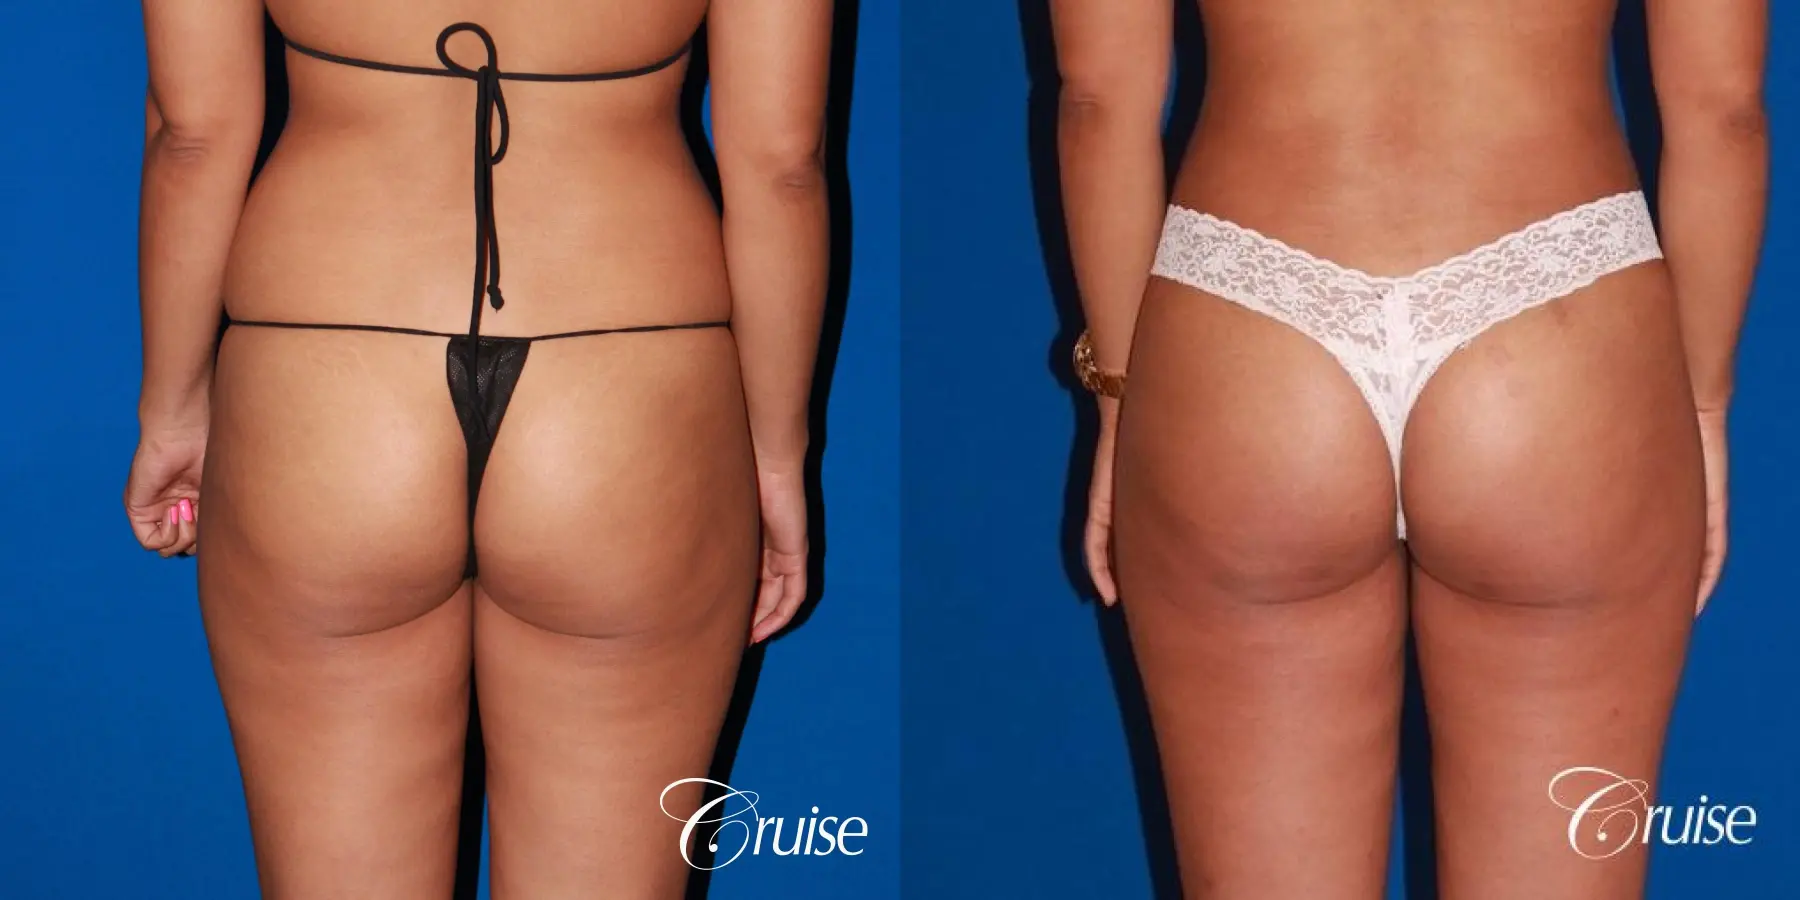 How Can I Remove Fat from My Flanks?, Liposuction Newport Beach